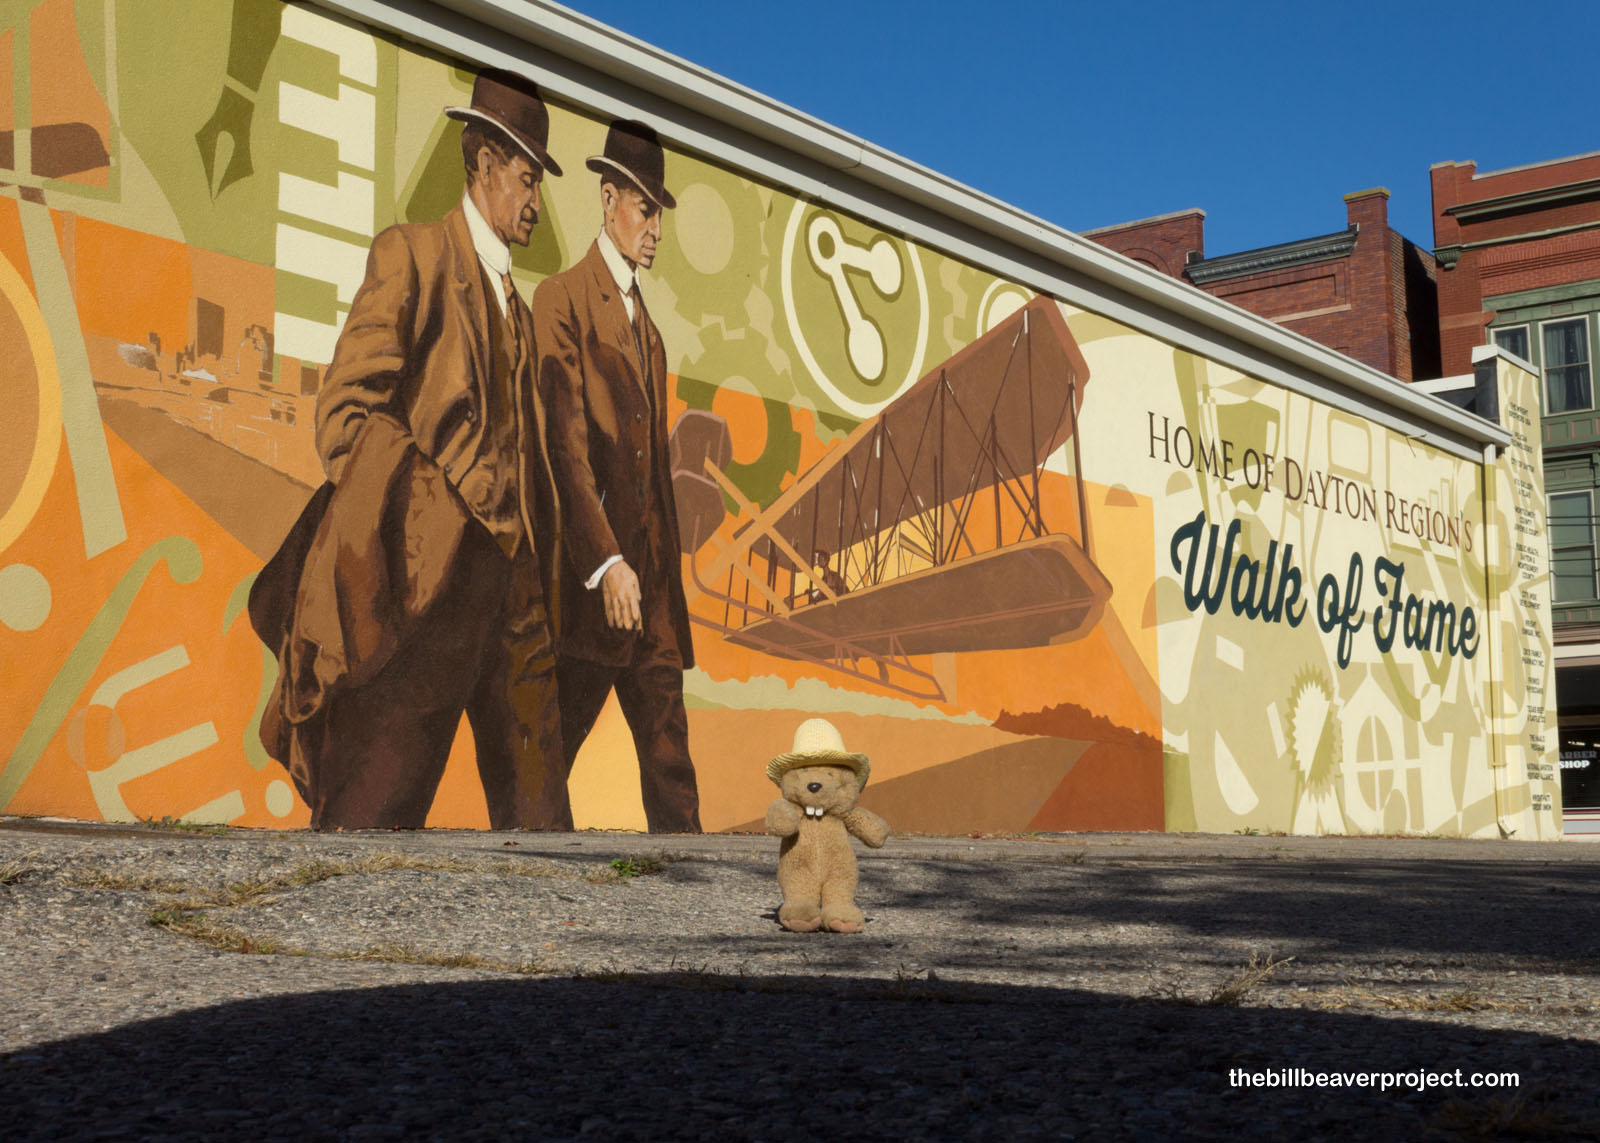 A mural commemorating the Wright Brothers' influence!